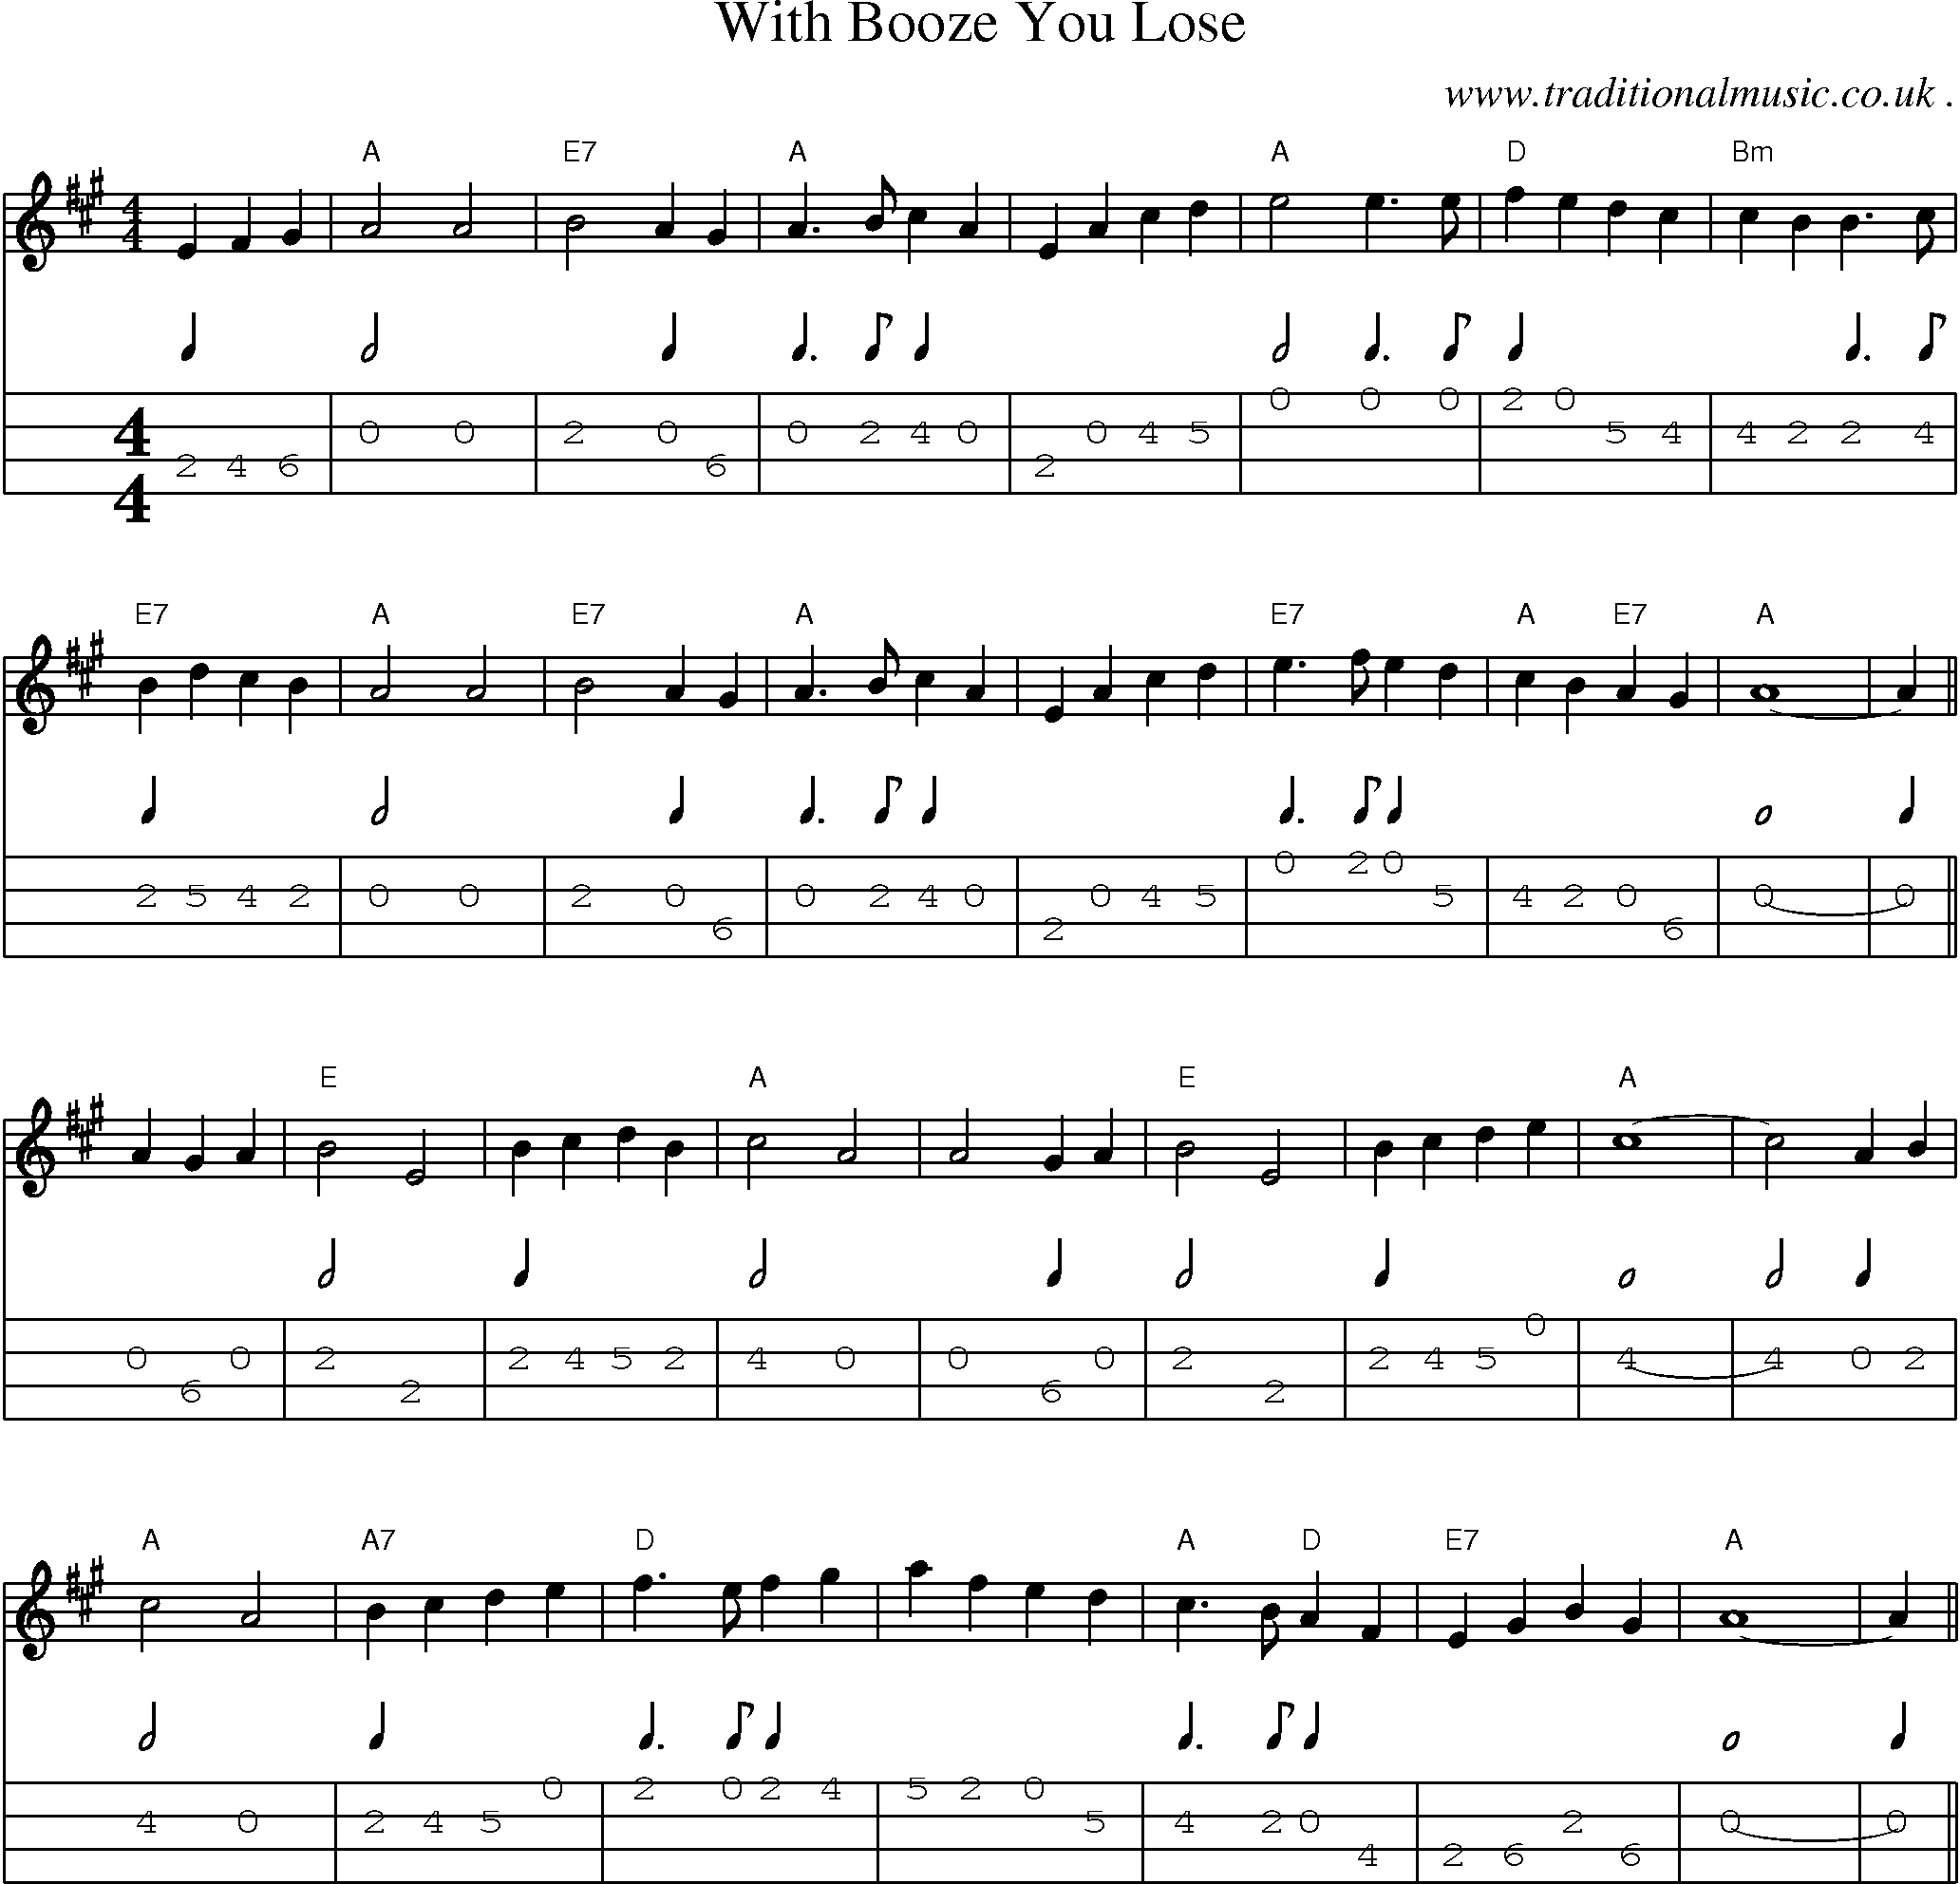 Sheet-Music and Mandolin Tabs for With Booze You Lose